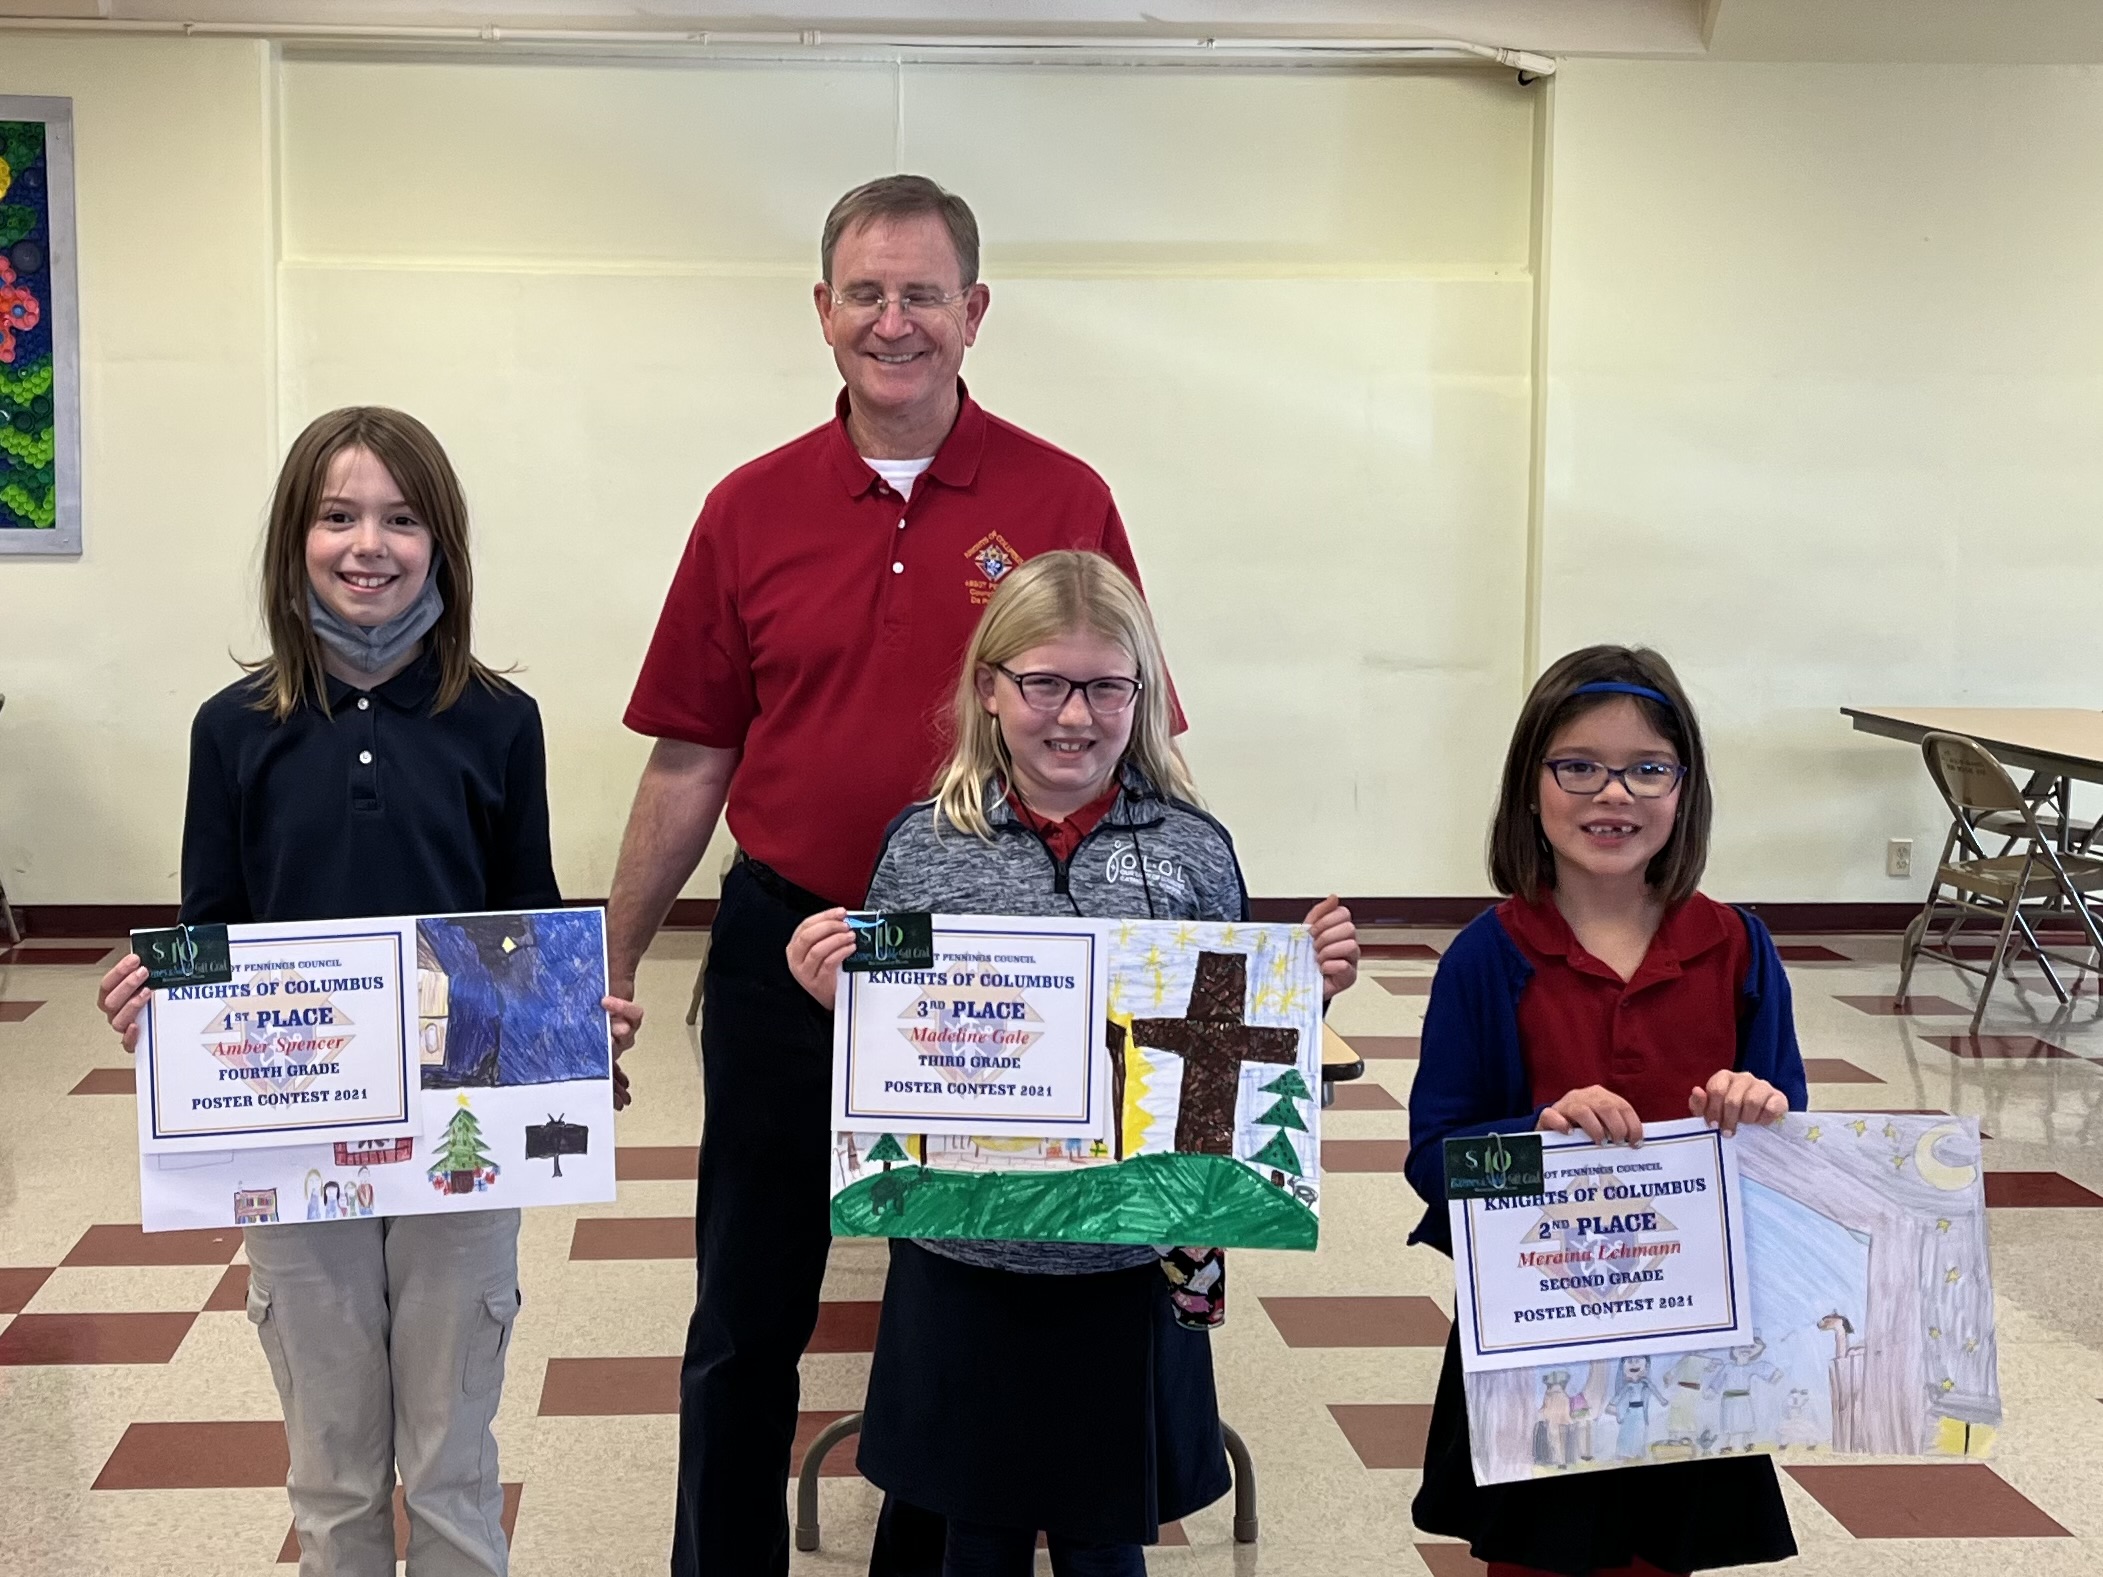 Our Lady of Lourdes Catholic School contest winners